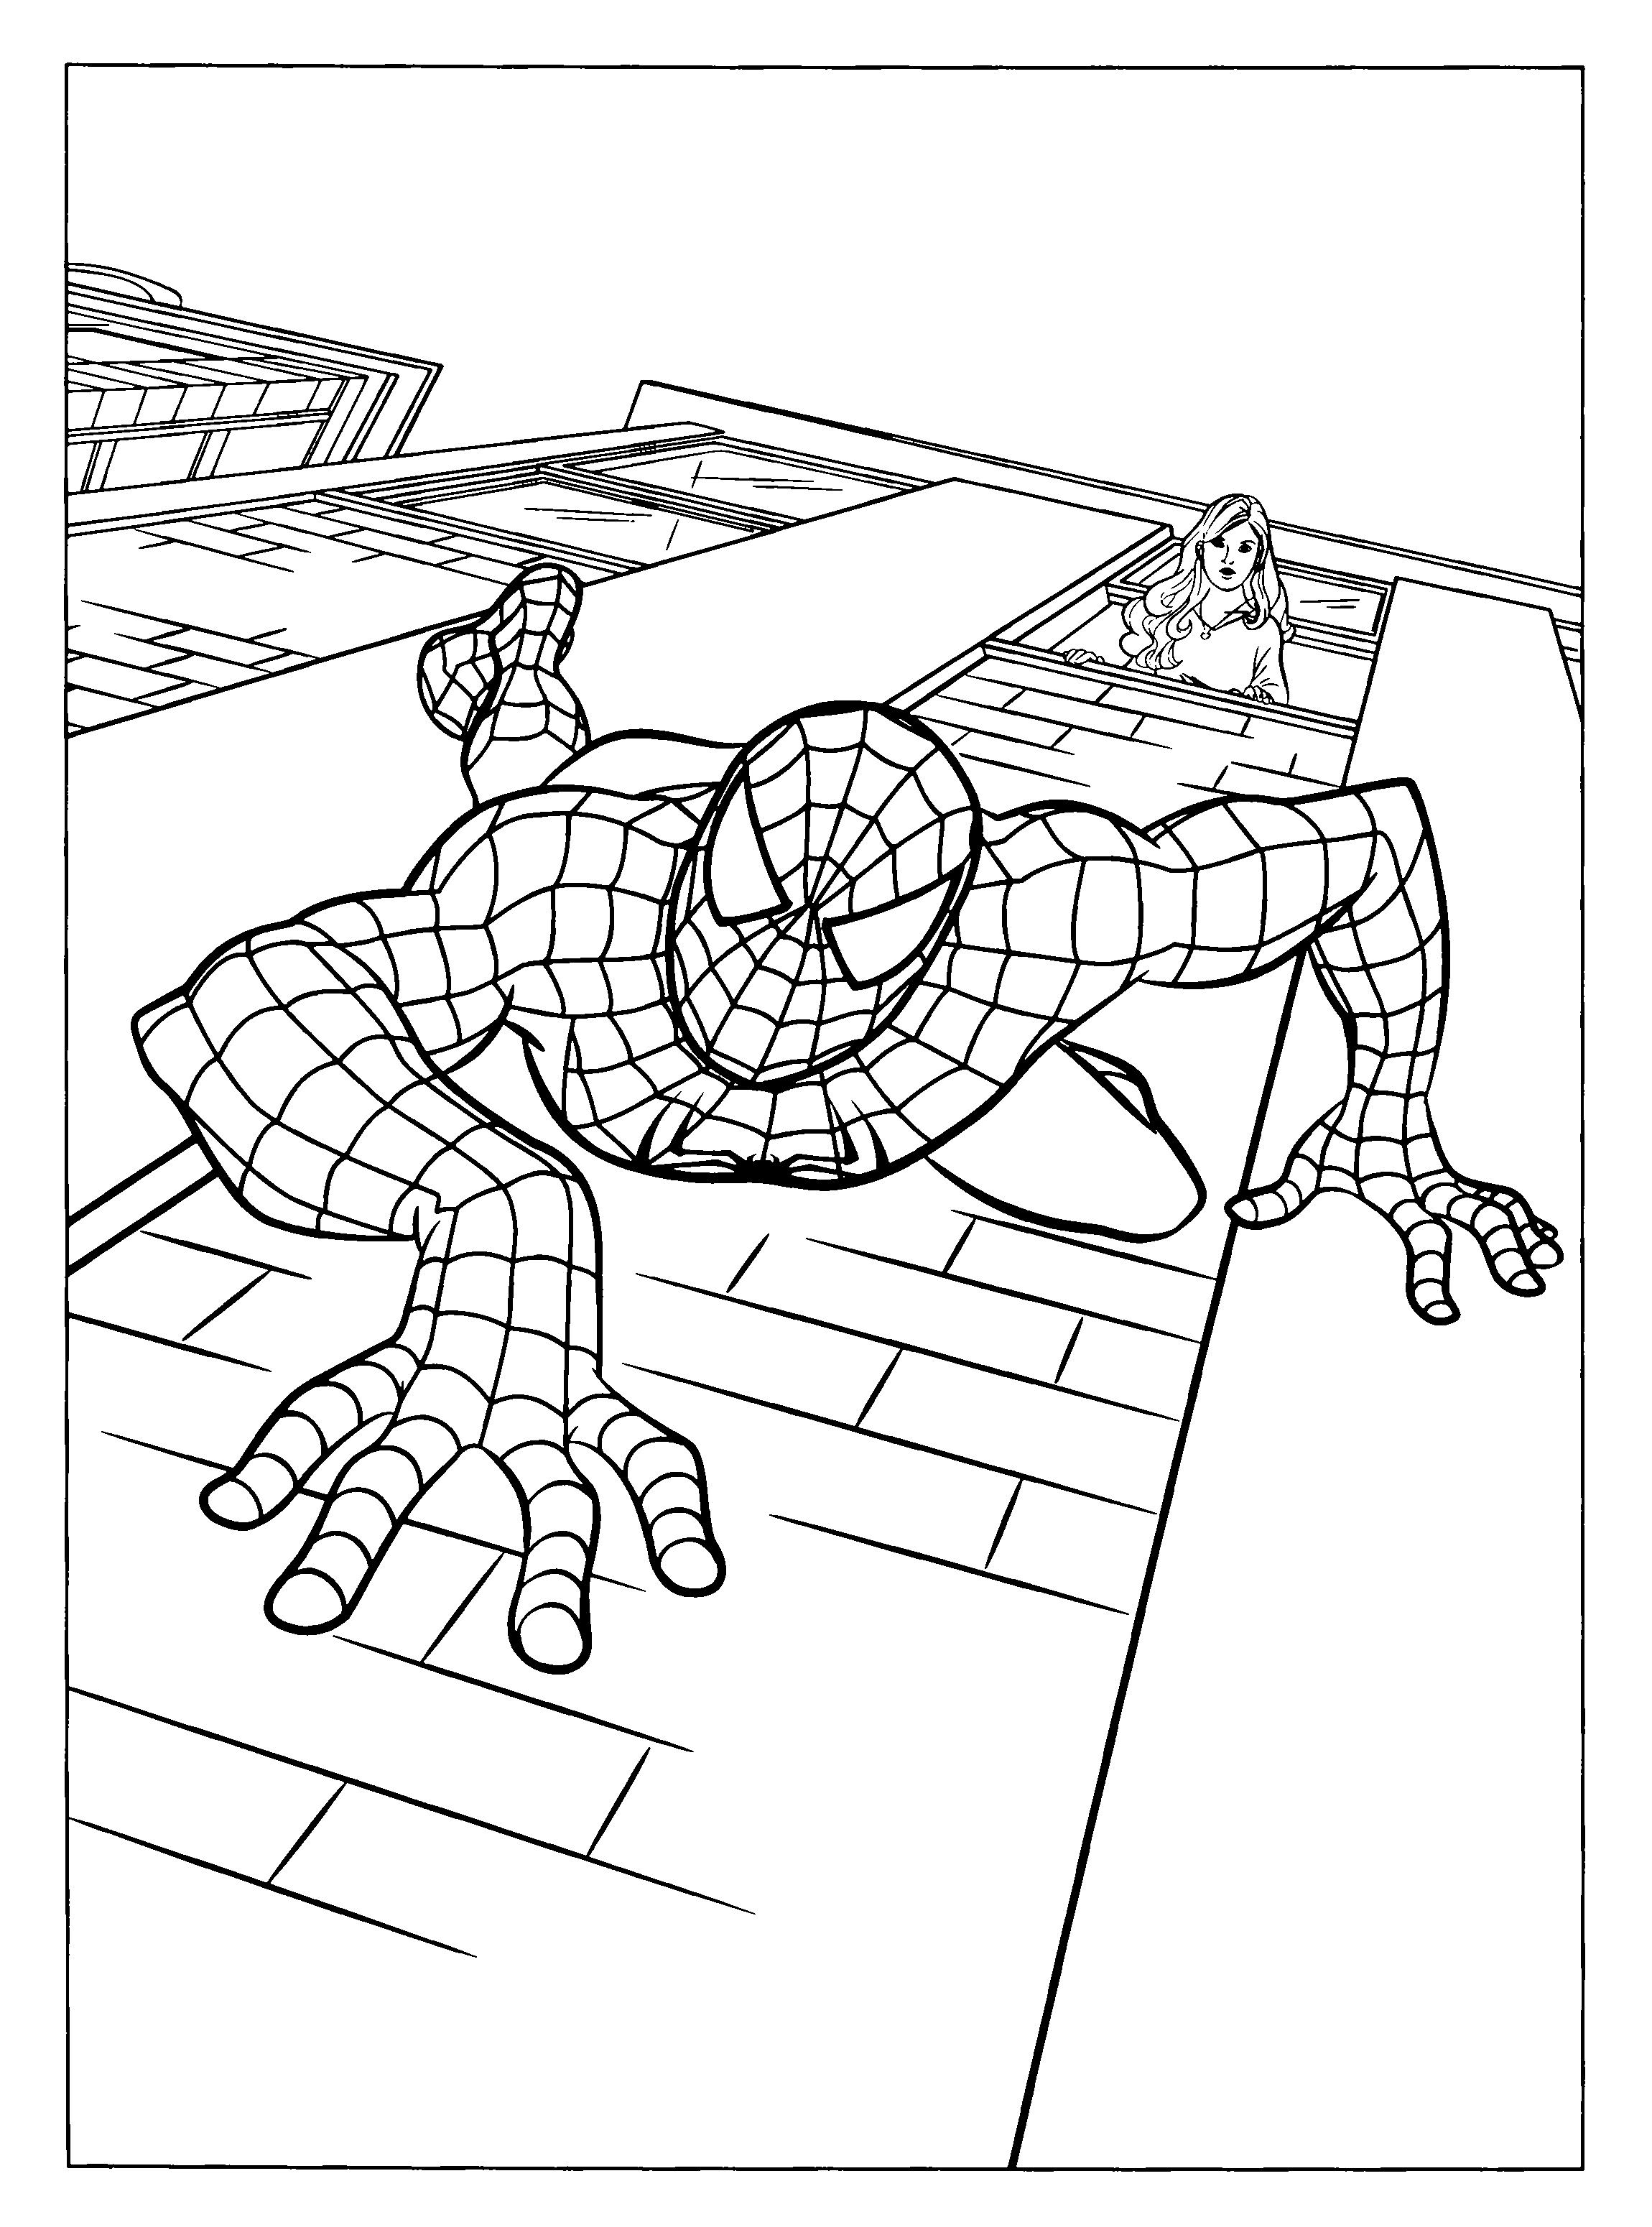 coloring-page-superhero-coloring-page-spiderman-3-picgifs